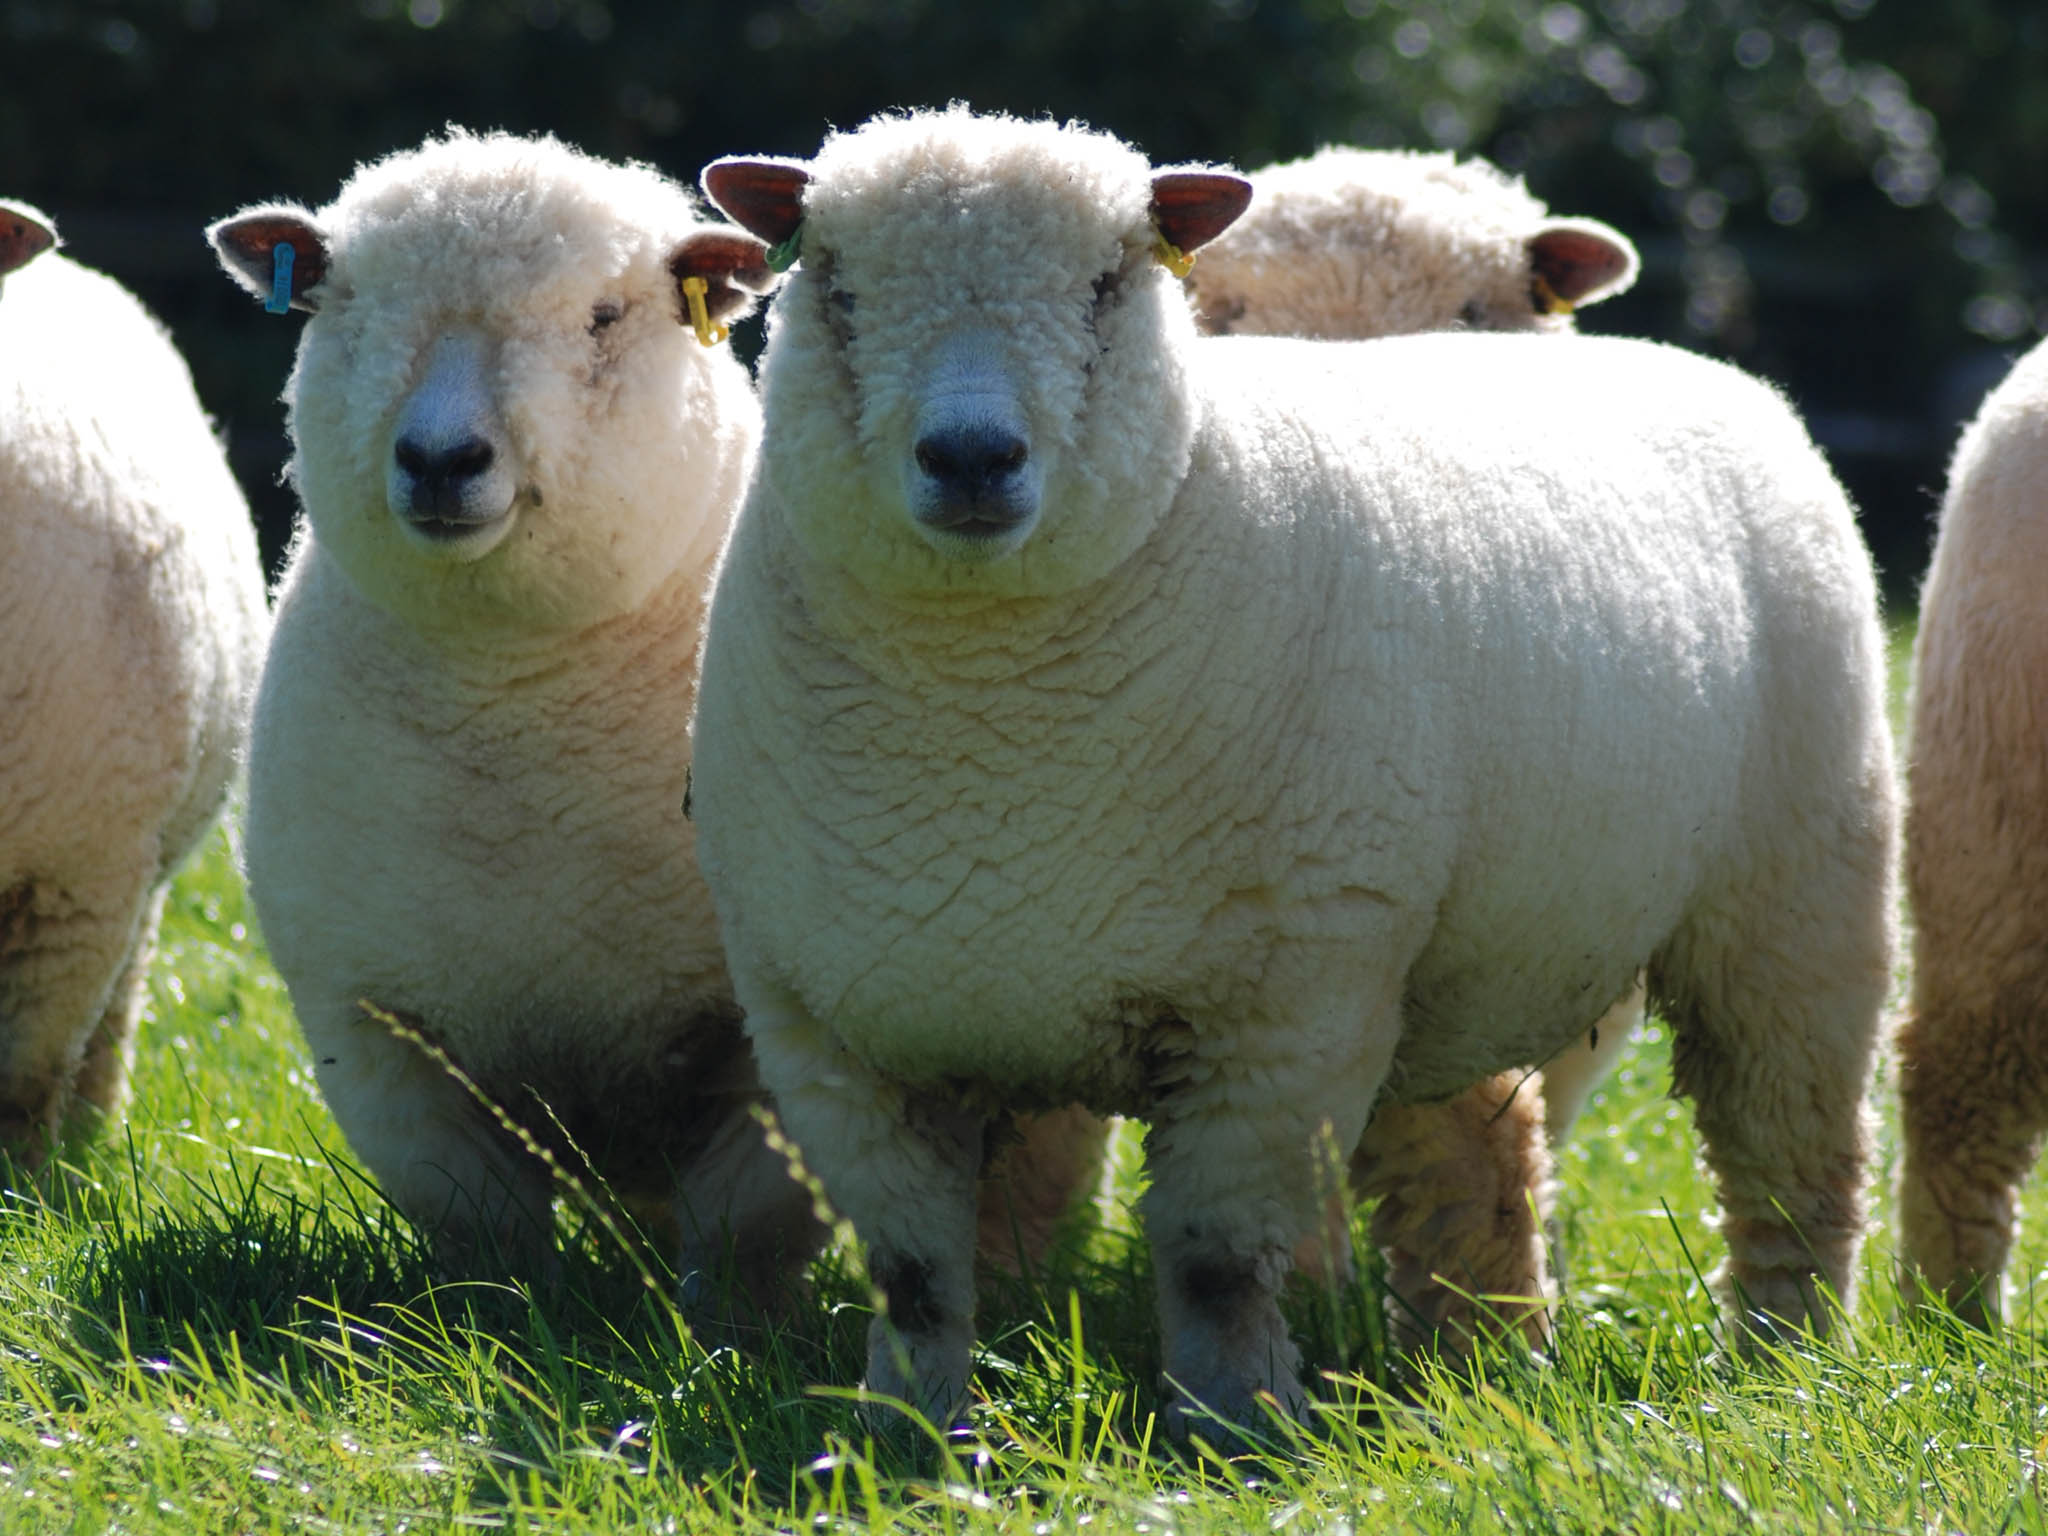 Sheep make up the majority of live animal exports from the UK to Europe